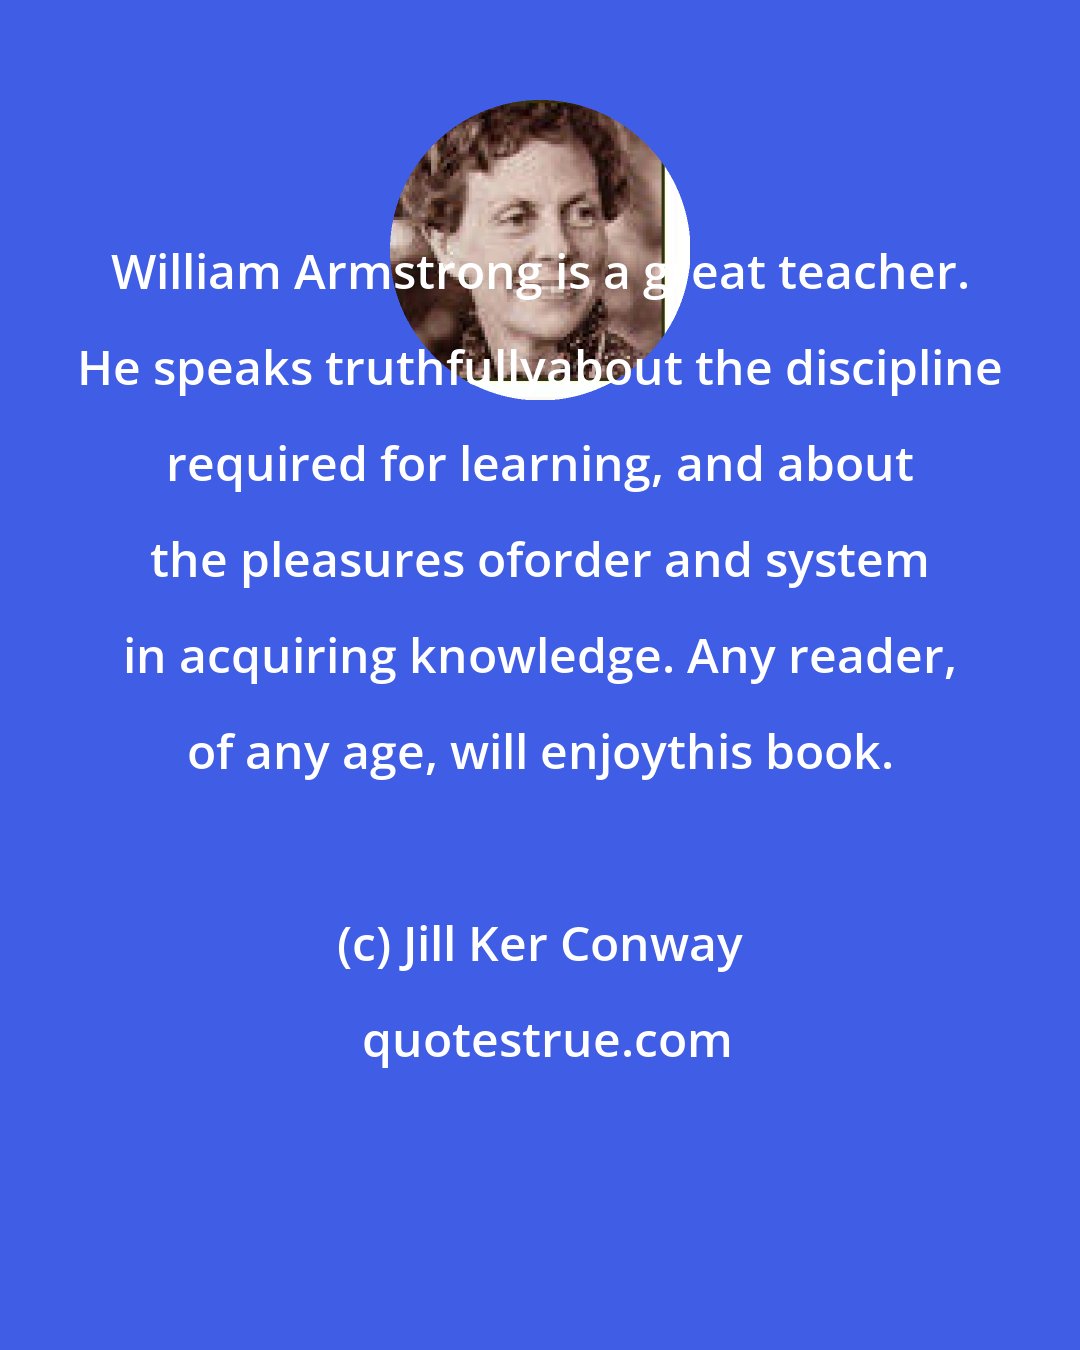 Jill Ker Conway: William Armstrong is a great teacher. He speaks truthfullyabout the discipline required for learning, and about the pleasures oforder and system in acquiring knowledge. Any reader, of any age, will enjoythis book.